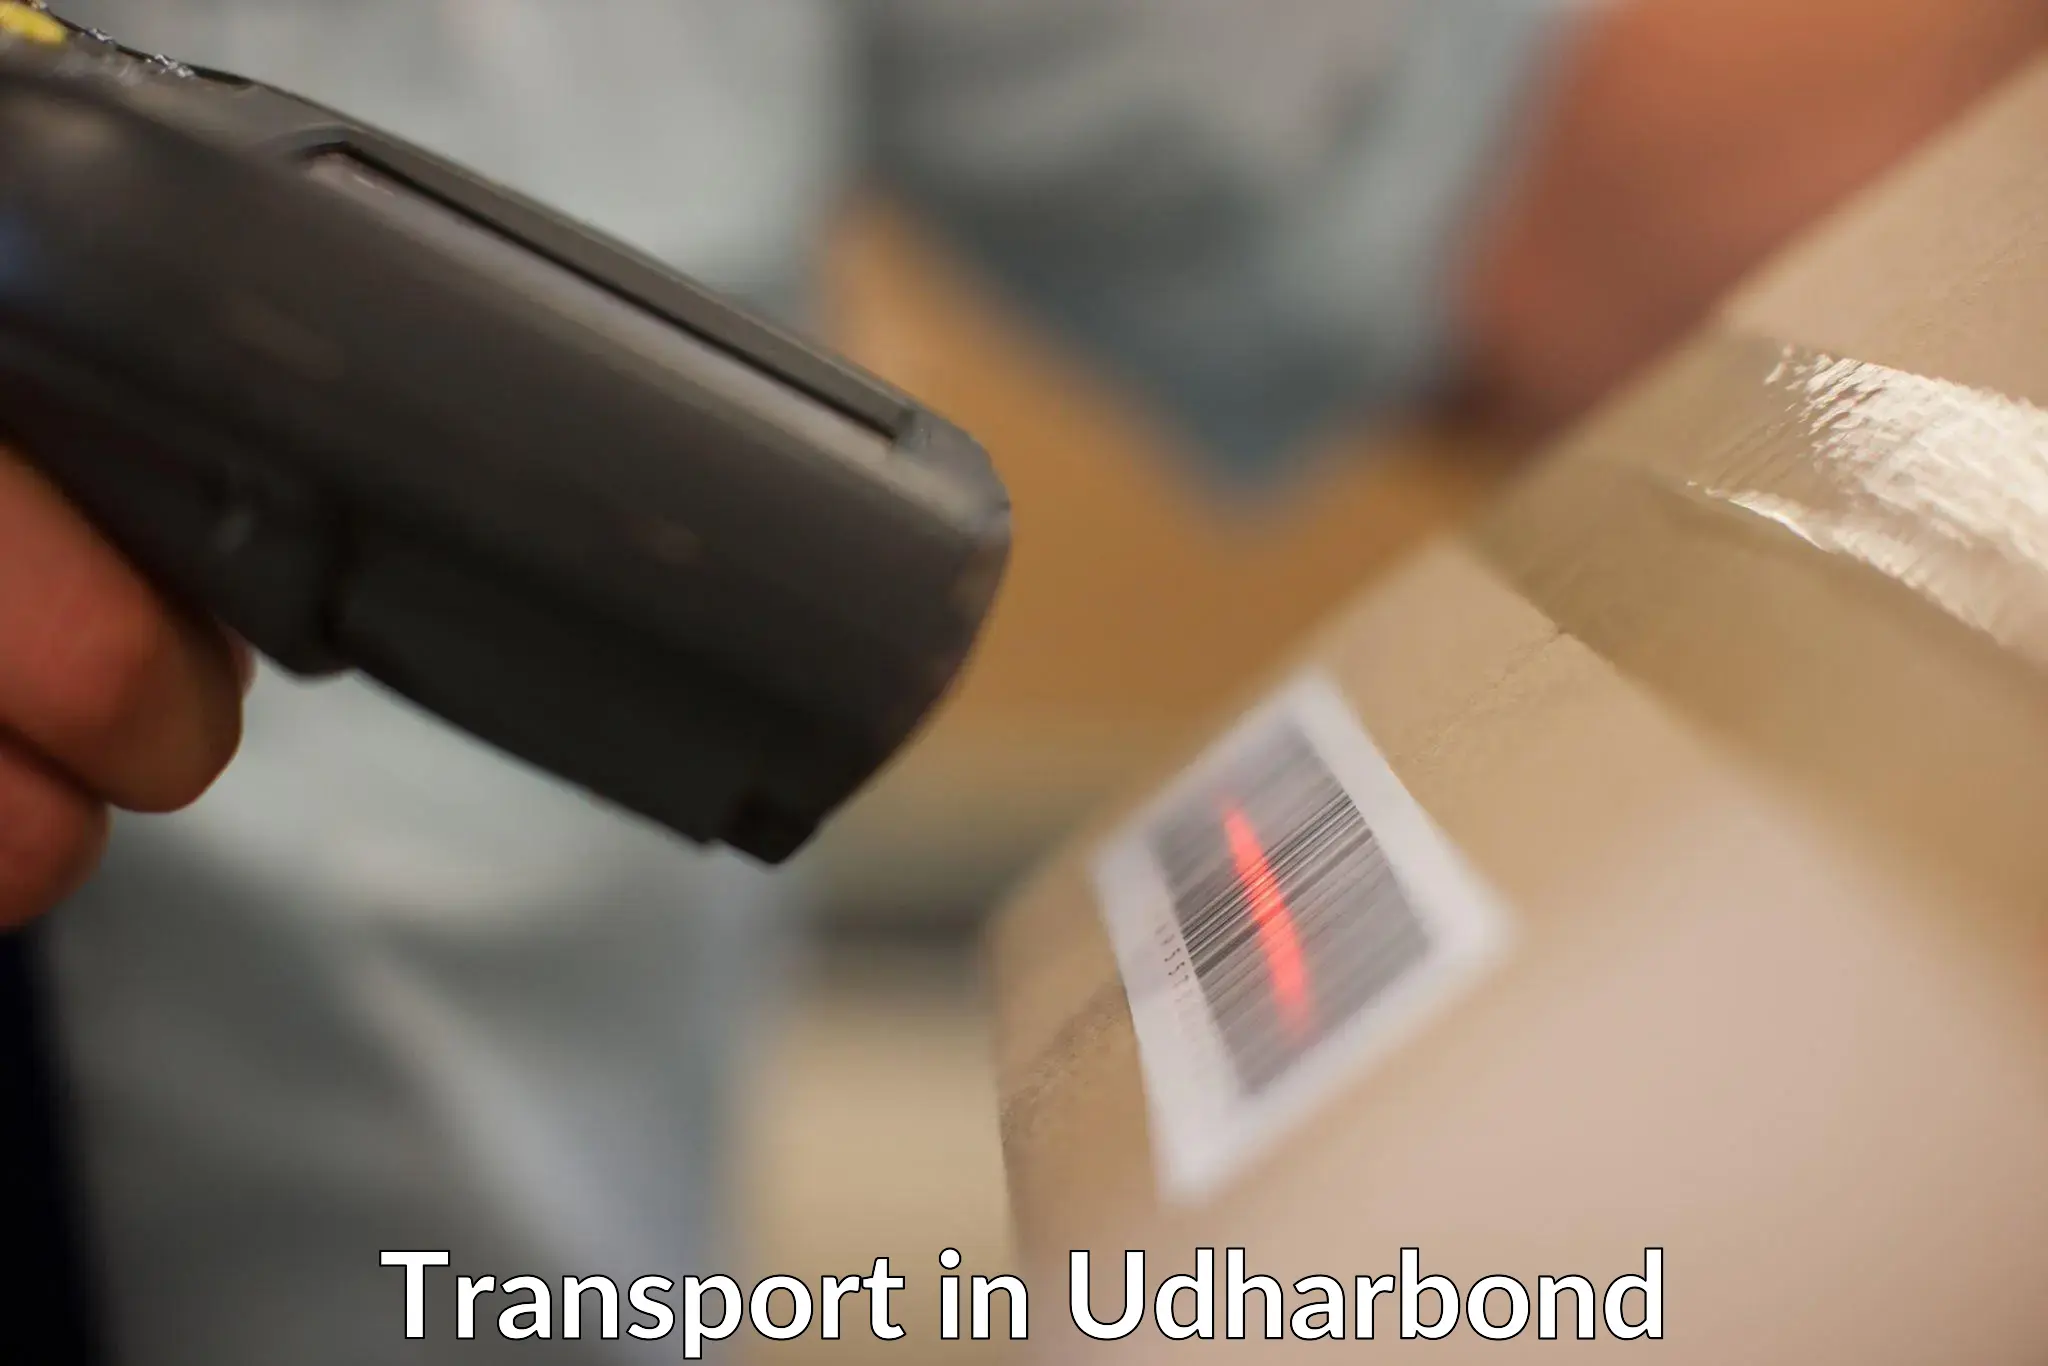 Air freight transport services in Udharbond